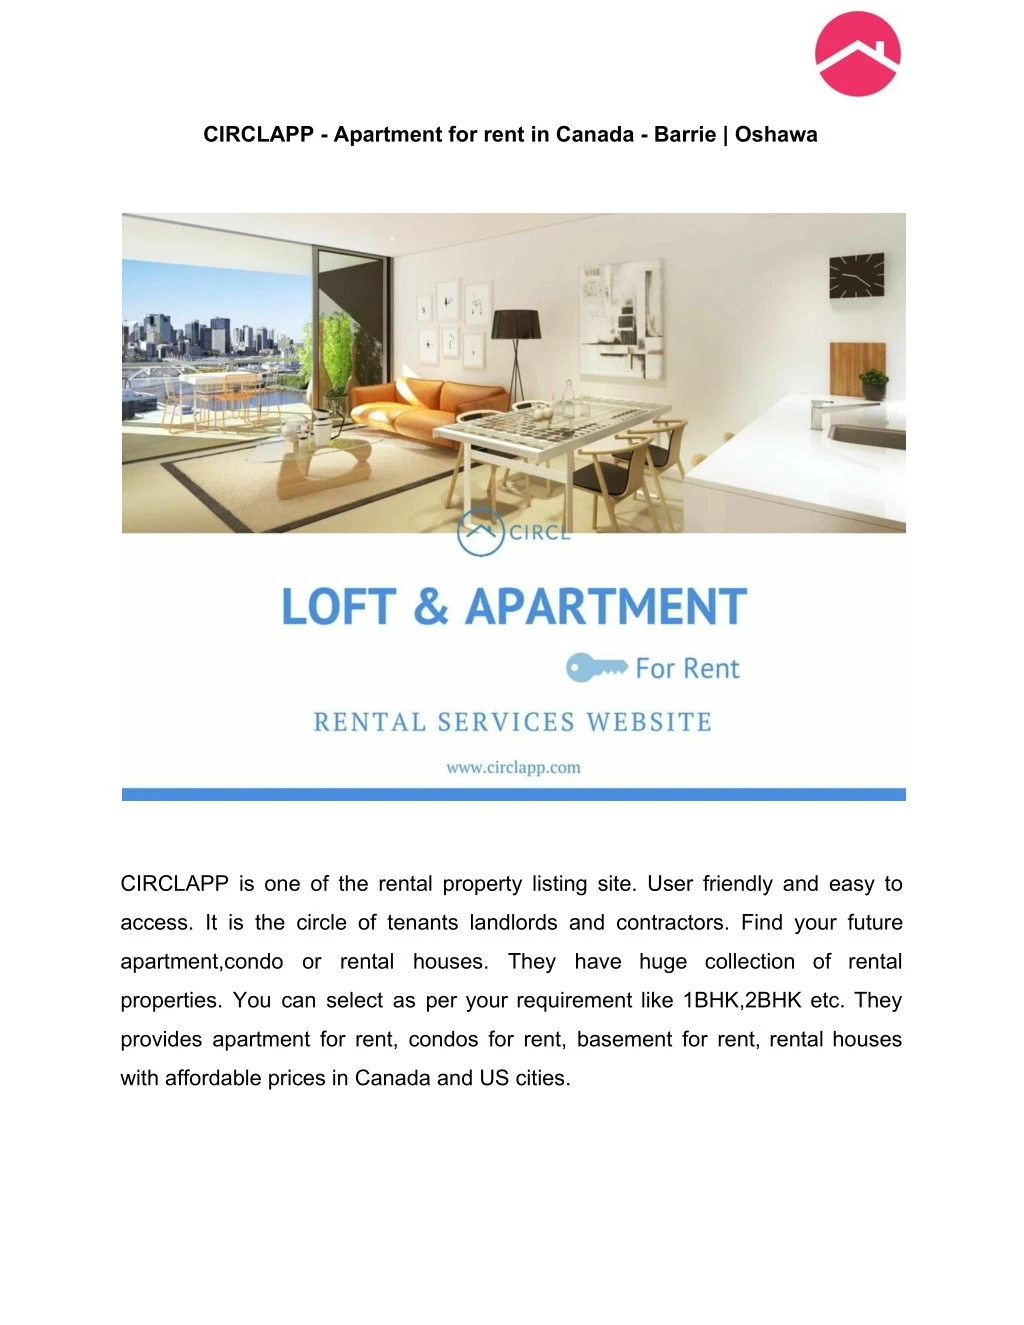 circlapp apartment for rent in canada barrie